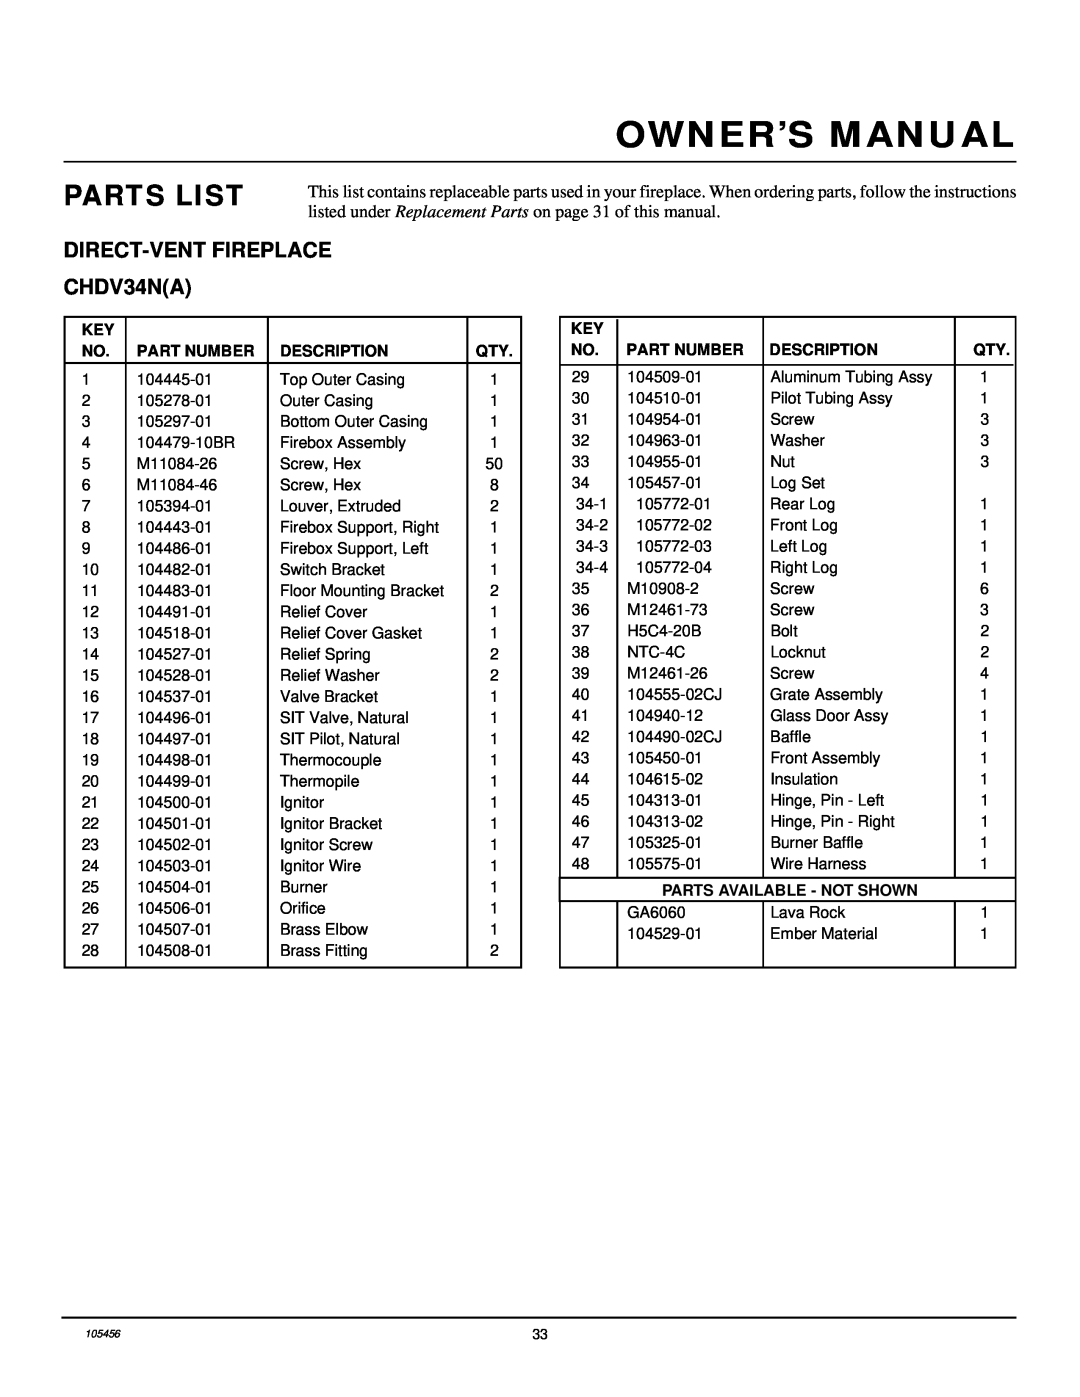 Desa CHDV34(N/P)(A) installation manual Parts List, DIRECT-VENTFIREPLACE CHDV34NA, Owner’S Manual 